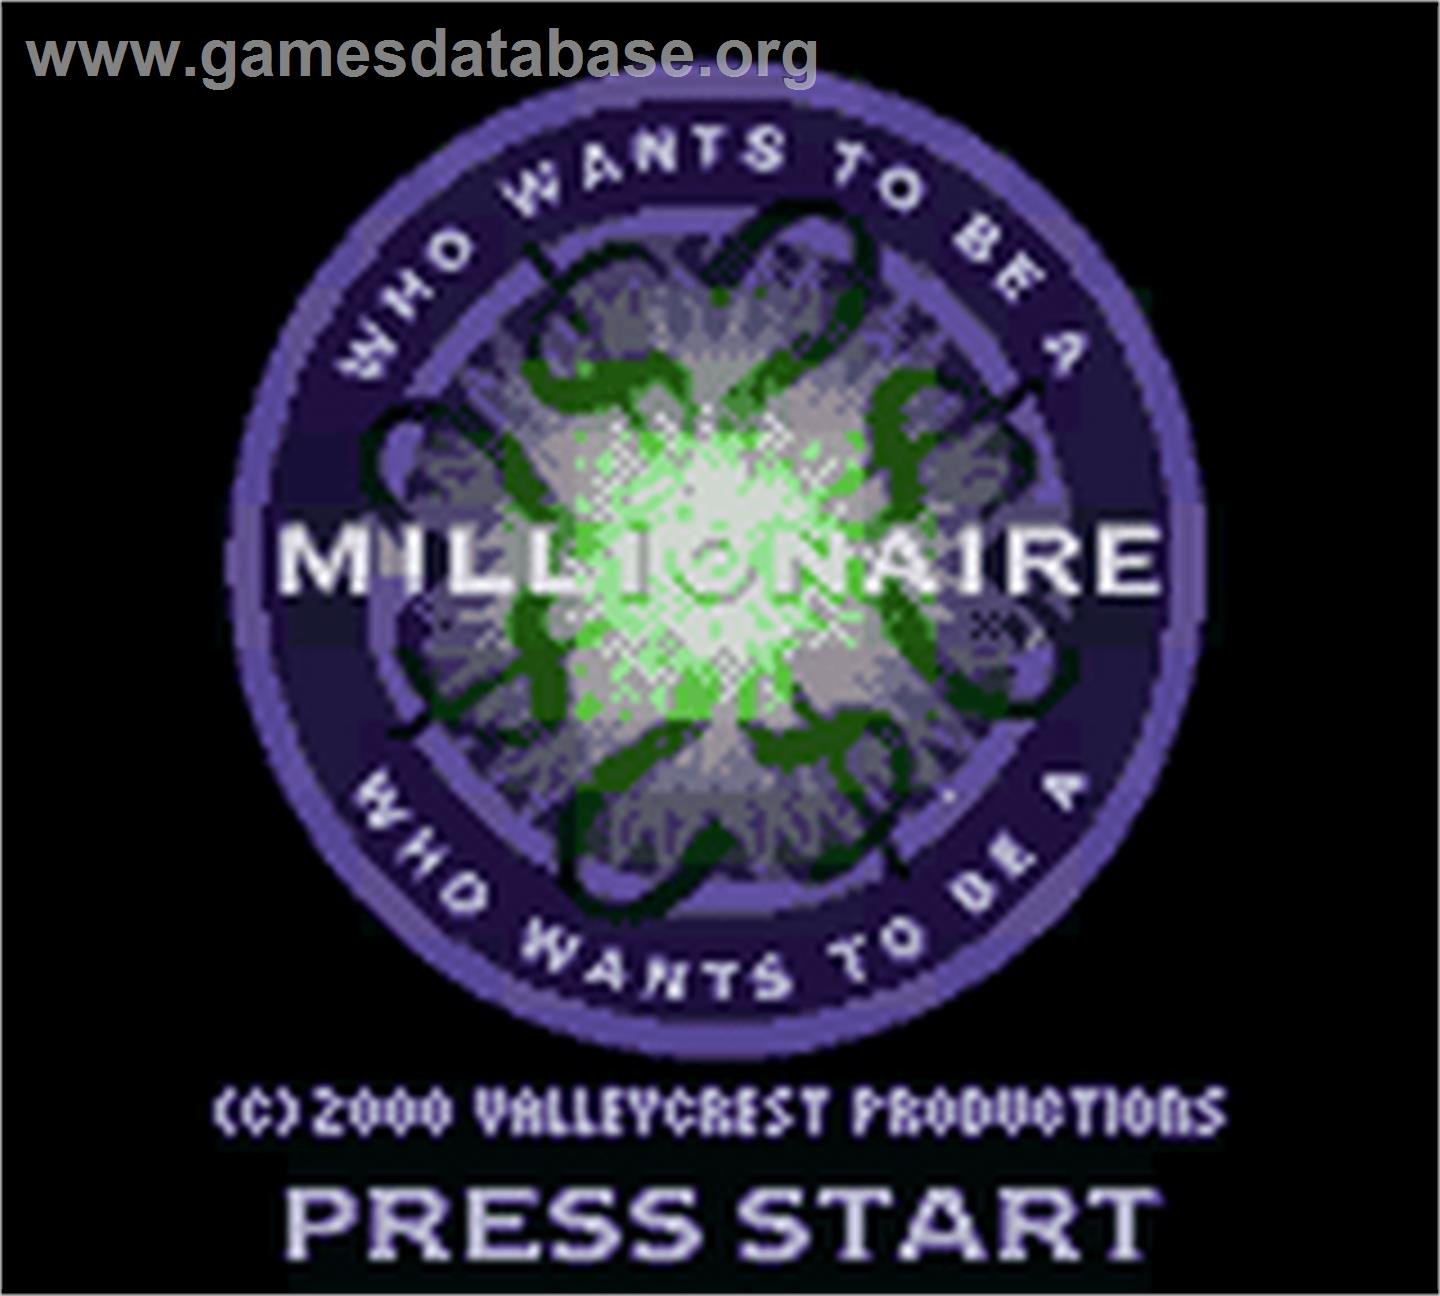 Who Wants To Be A Millionaire? - Nintendo Game Boy Color - Artwork - Title Screen